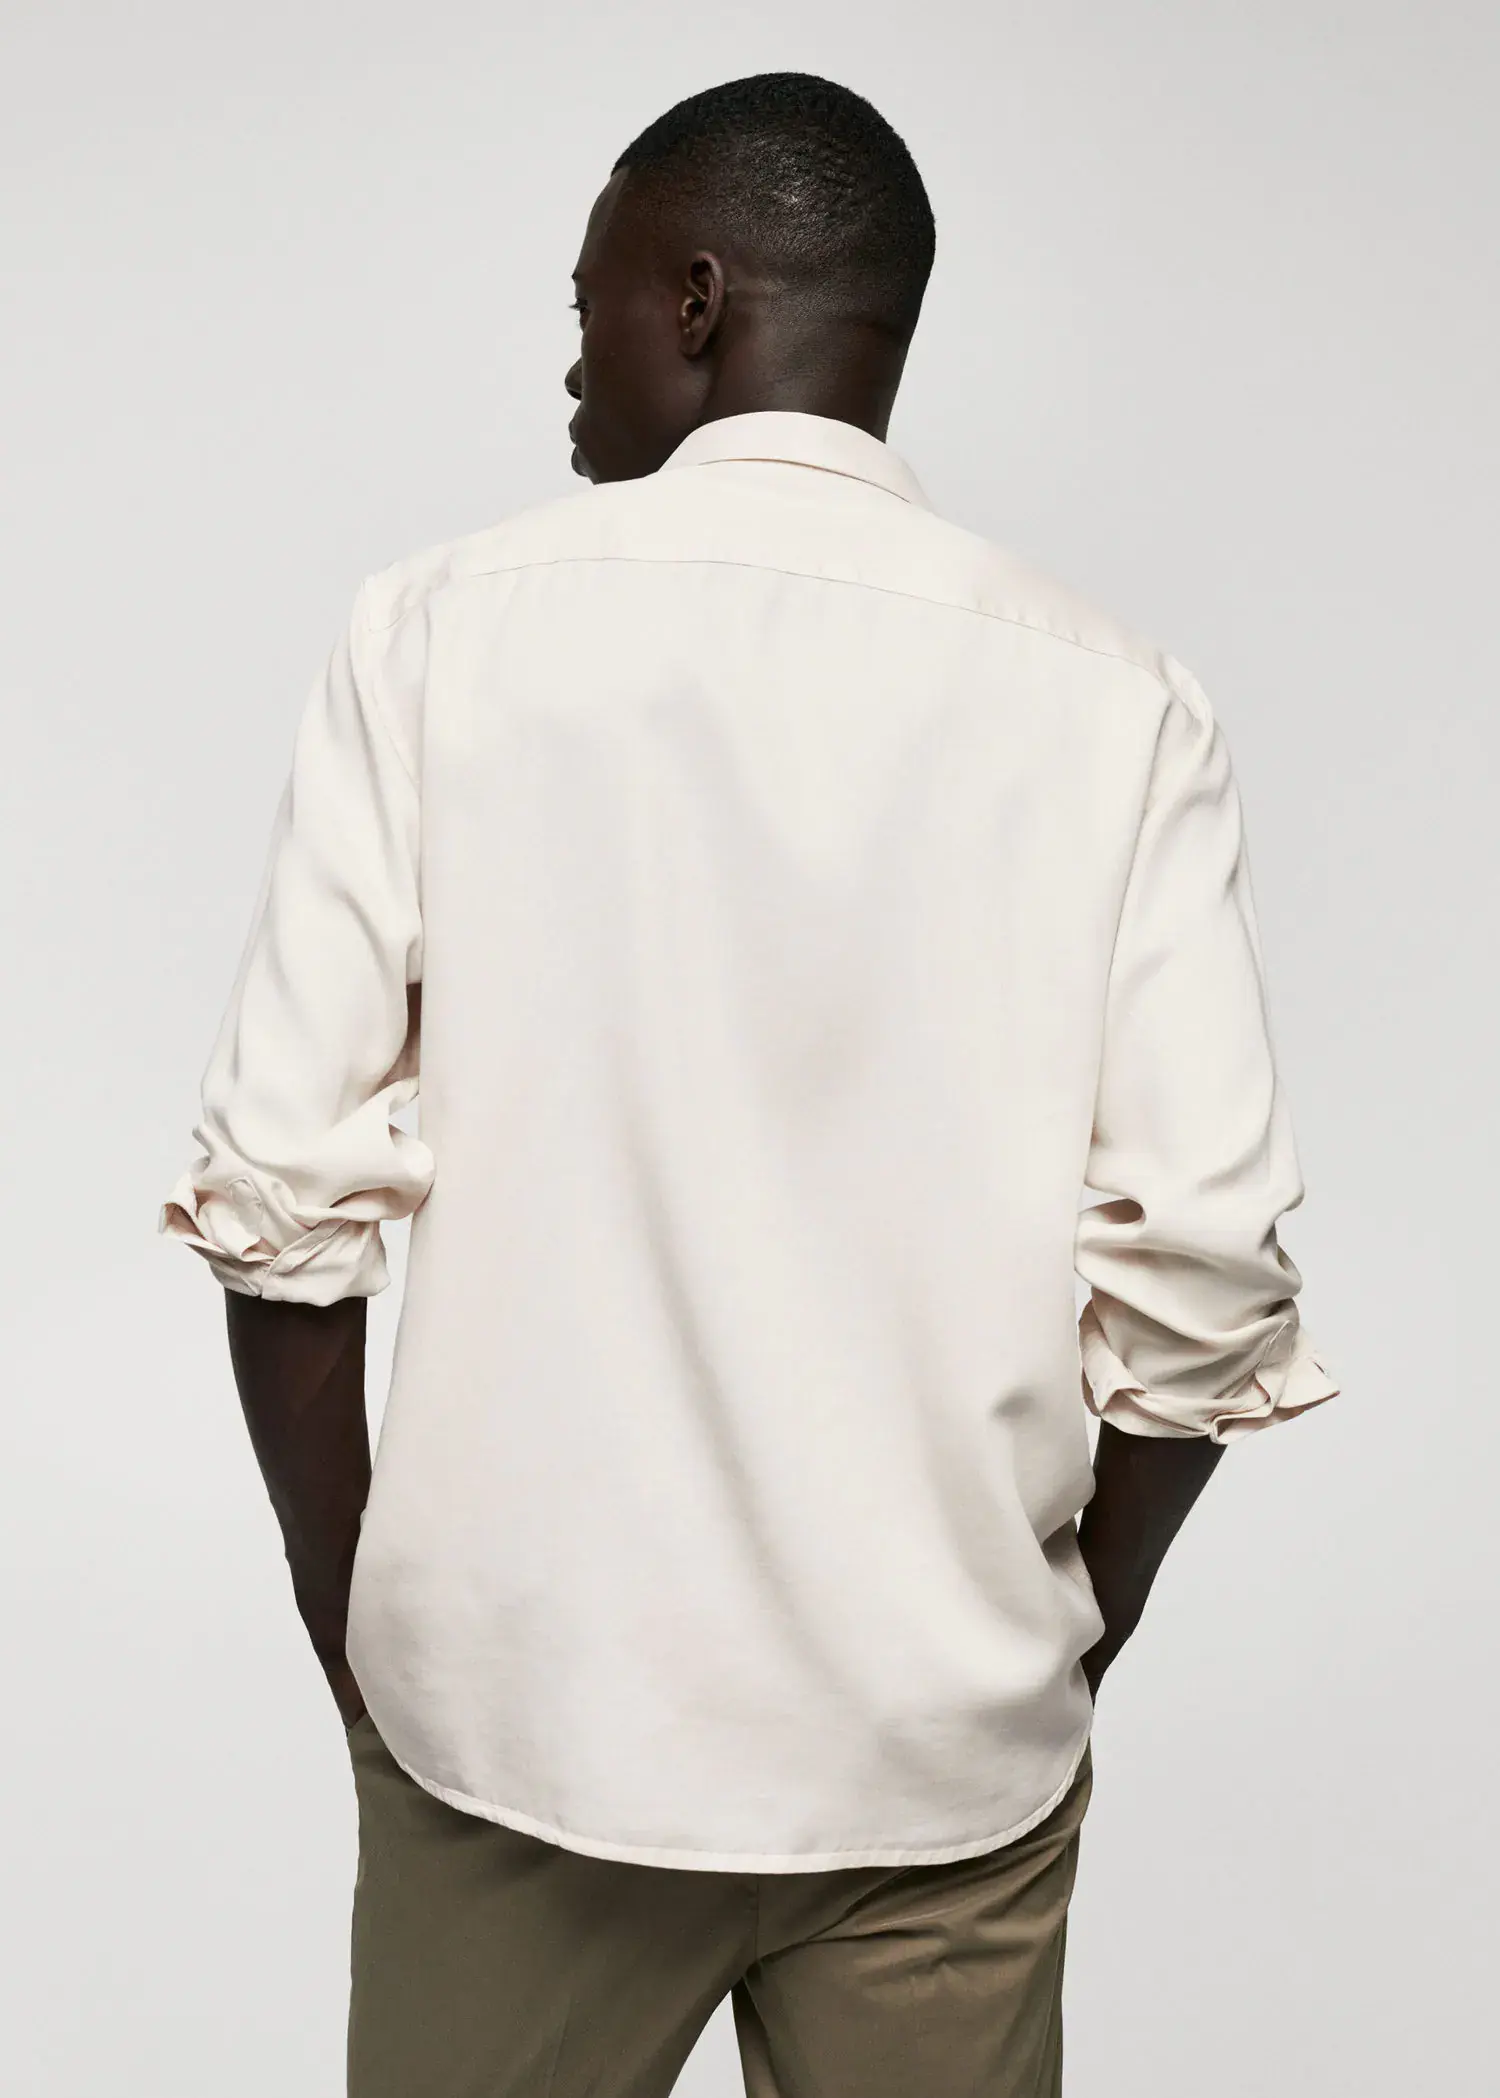 Mango Lyocell fluid shirt. a man in a white shirt is standing with his hands in his pockets. 